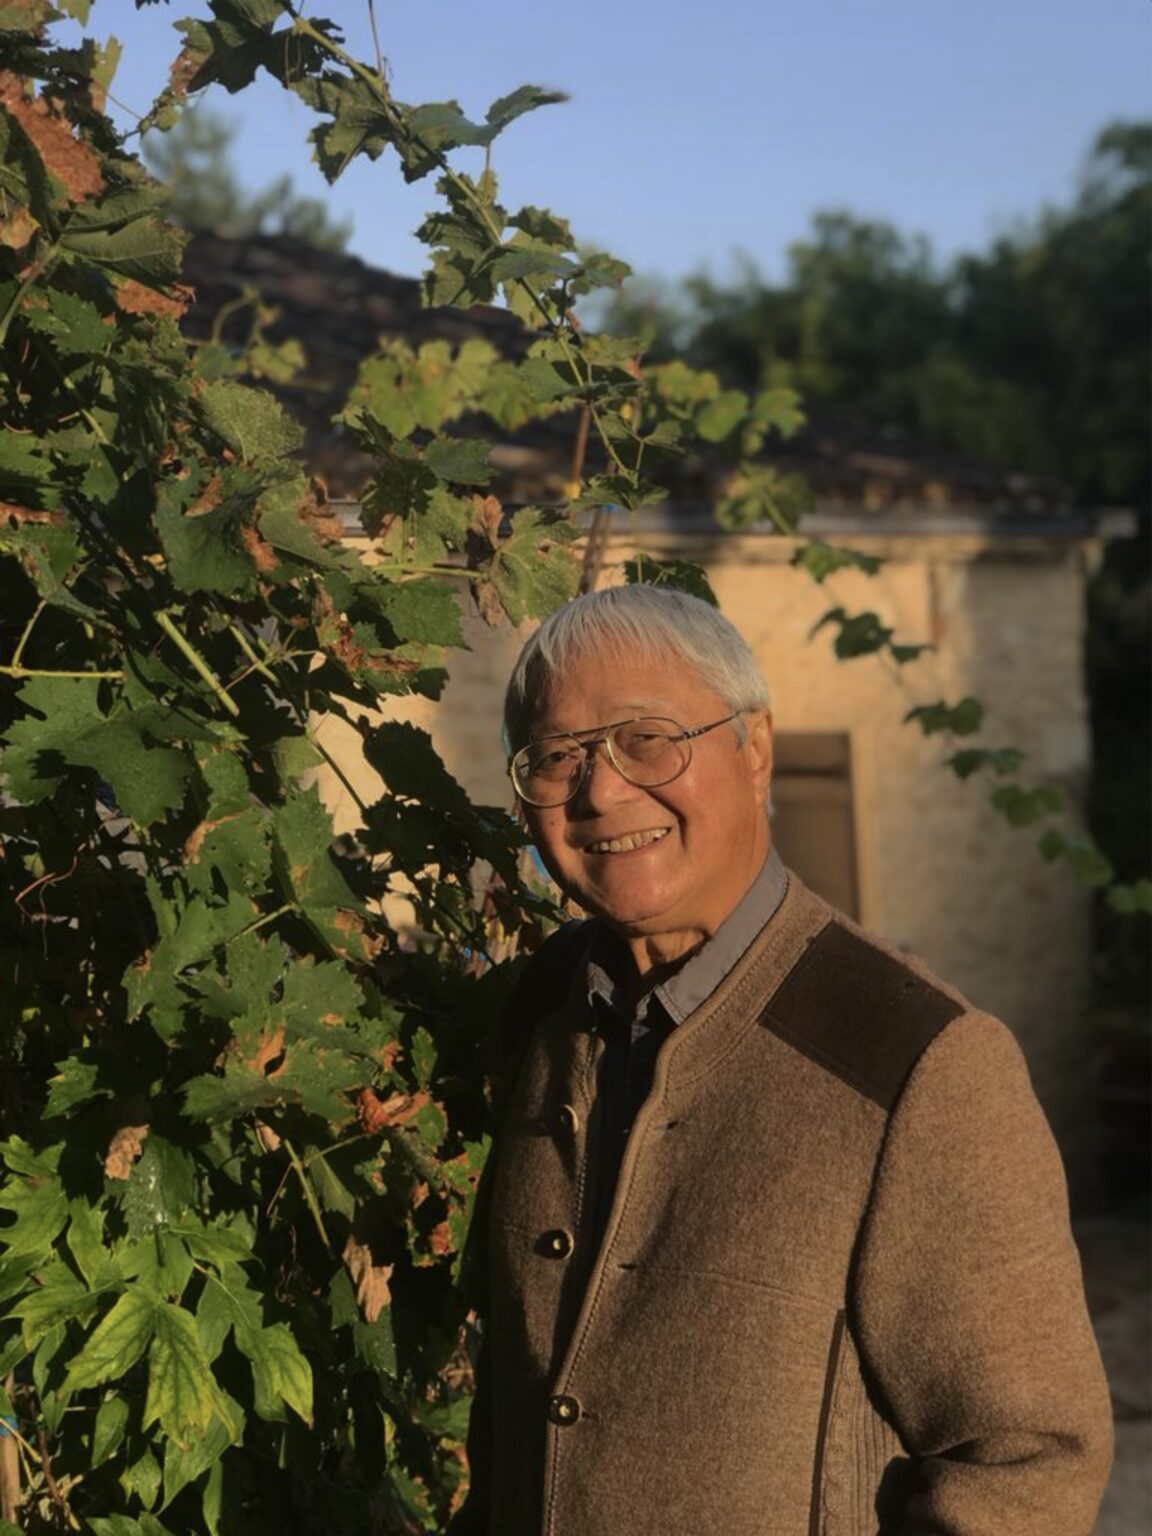 Ngo Manh Duc (B. 1941), son of Le Thi Luu (Vietnamese, 1911-1988) born on 1 January 1941, which he enunciates as “1.1.41” with his constant smile, speaking softly and slowly which never fails to grab the listener’s attention. He was brought up in a wonderful atmosphere of painters and intellectuals (often of Vietnamese origin), and this only helped to cement the ideals and traditions of family, close friends and kinships.